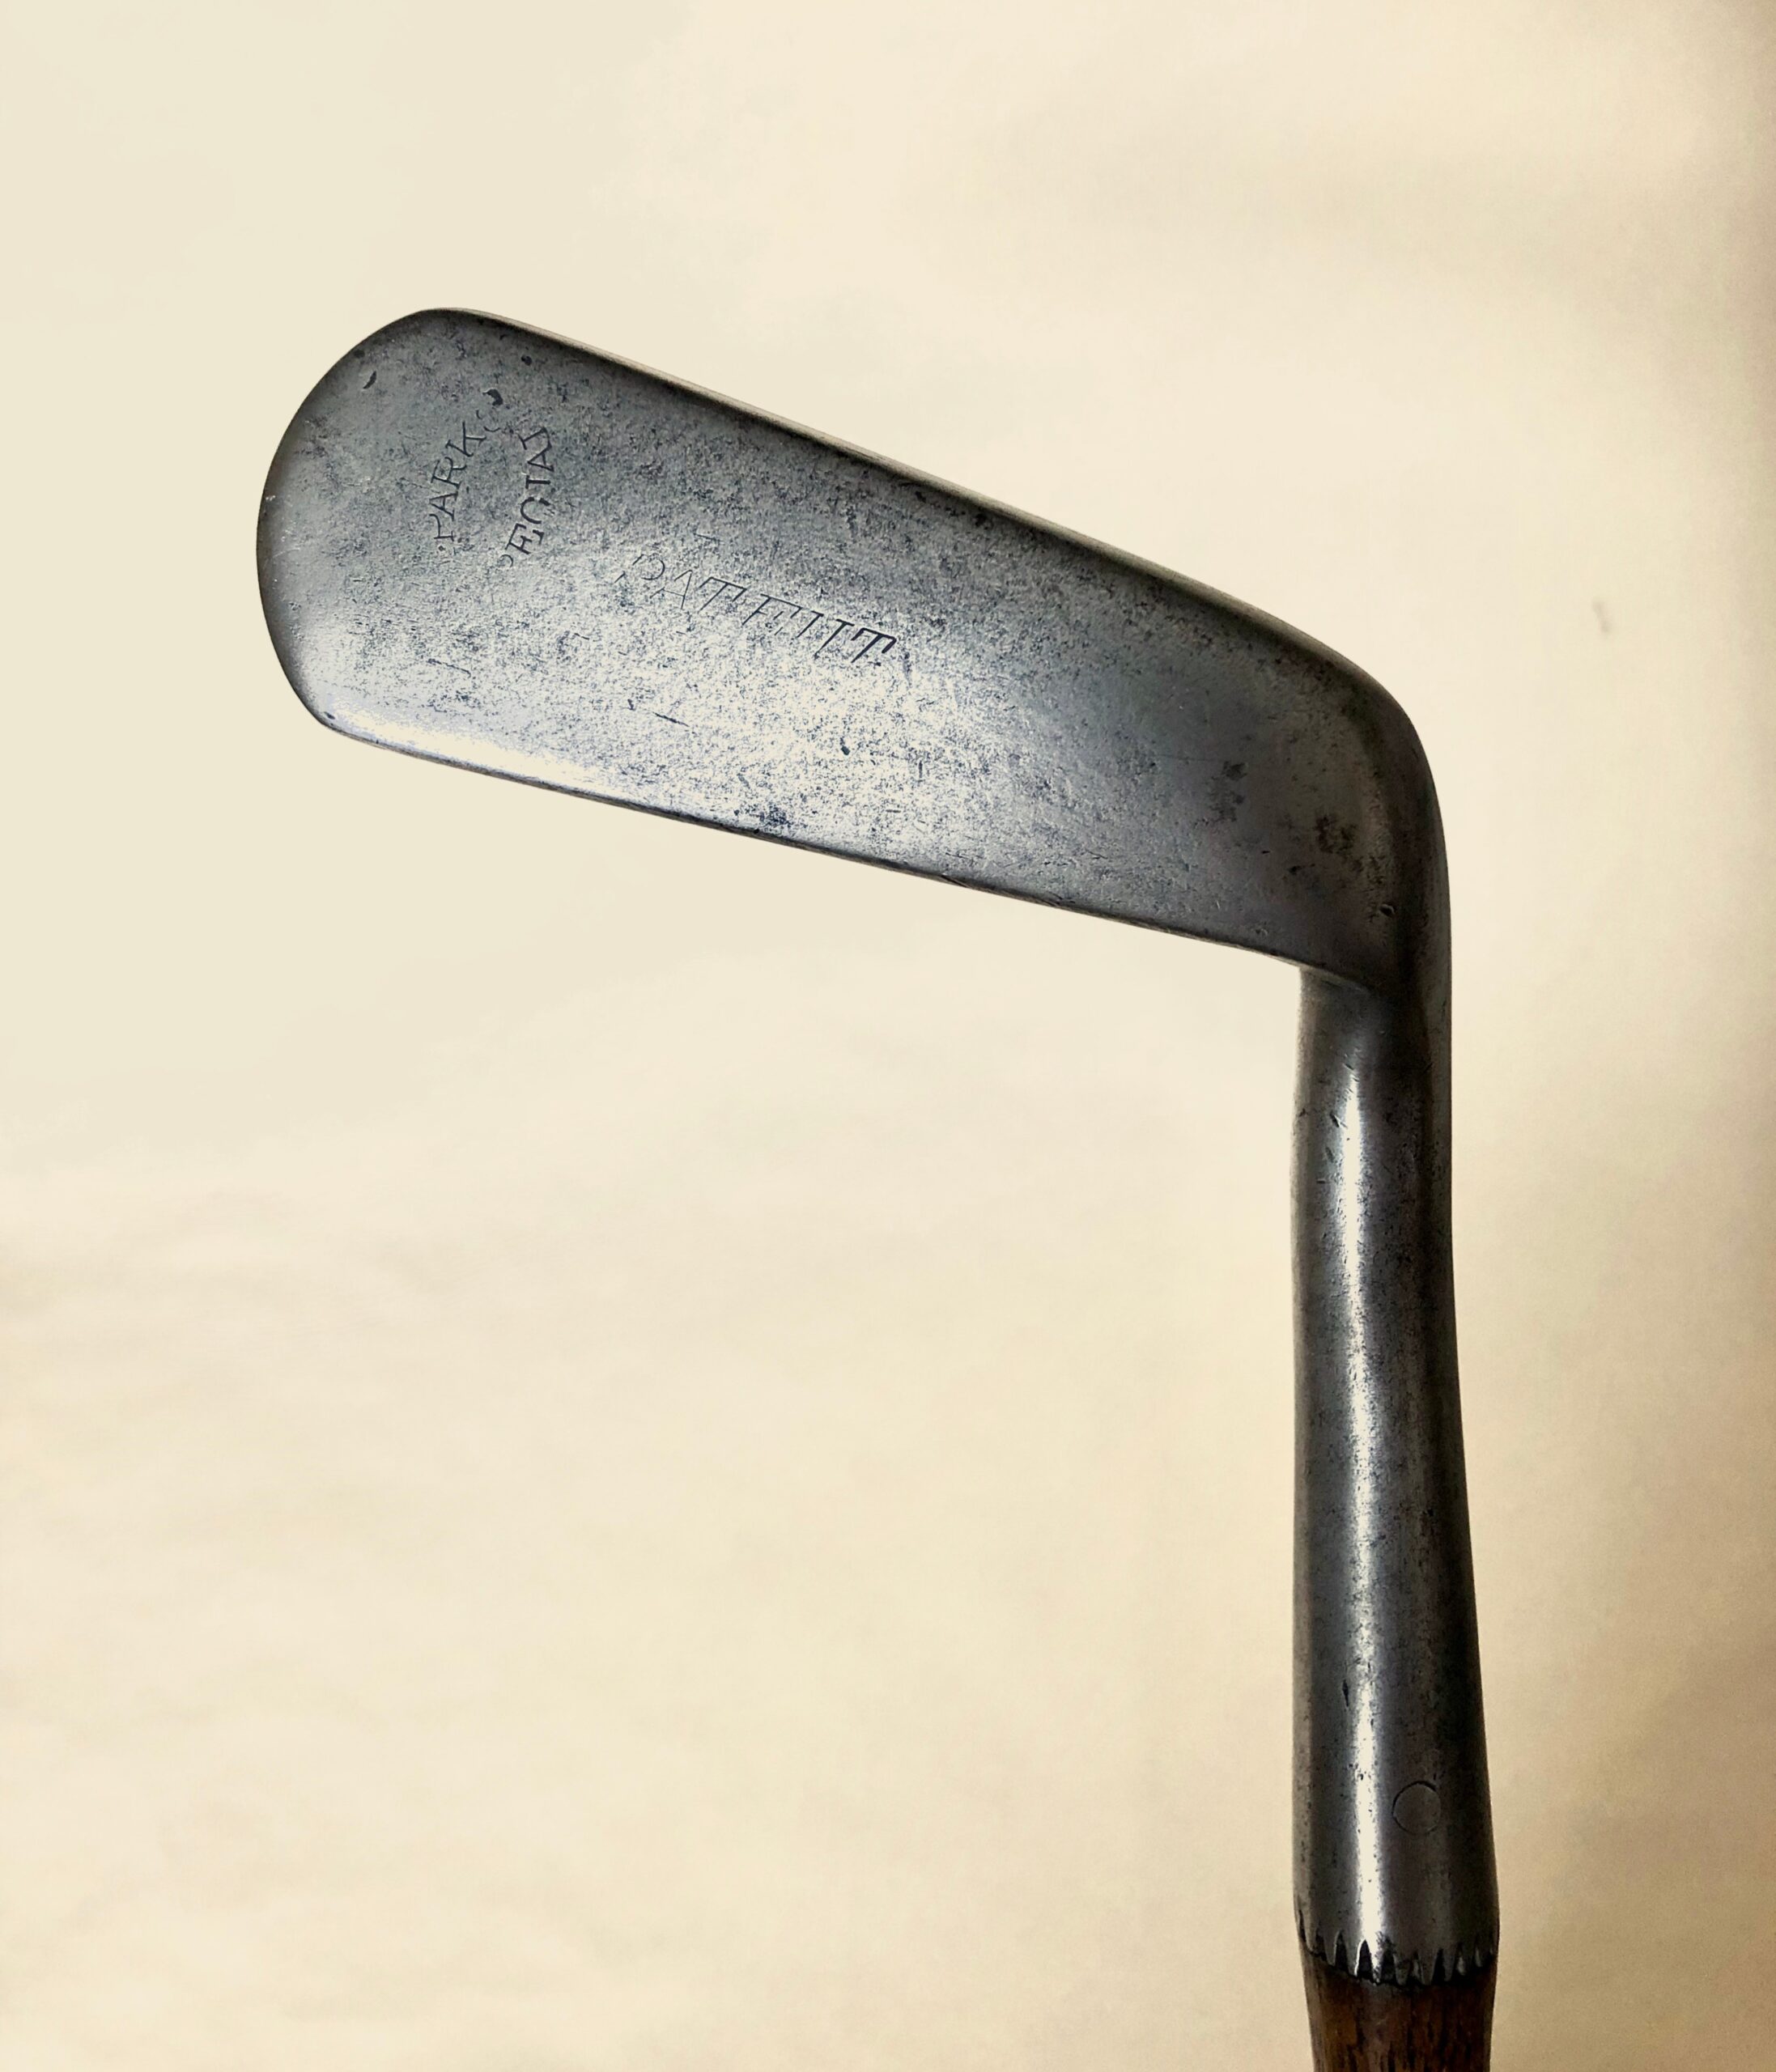 Patent 'Wry-neck' Putter by Willie Park Jr.